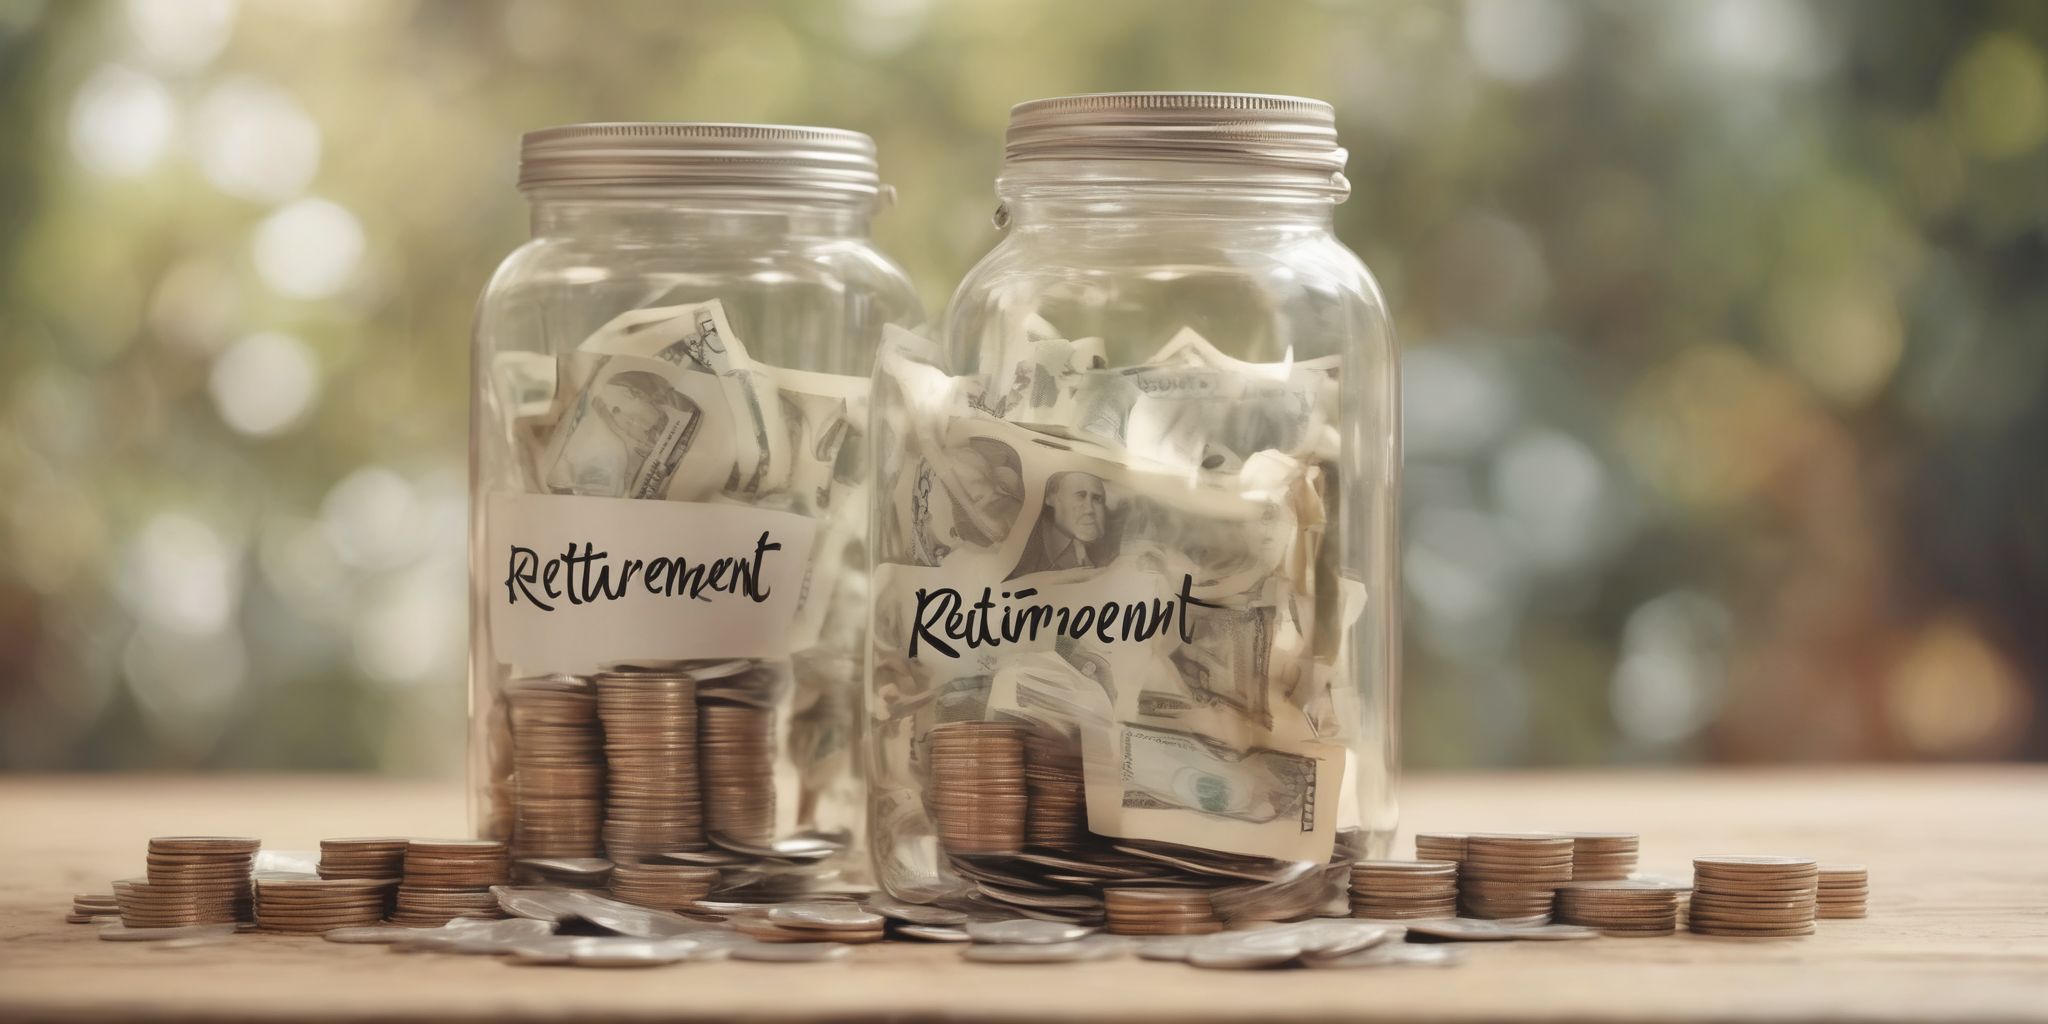 Retirement plan  in realistic, photographic style